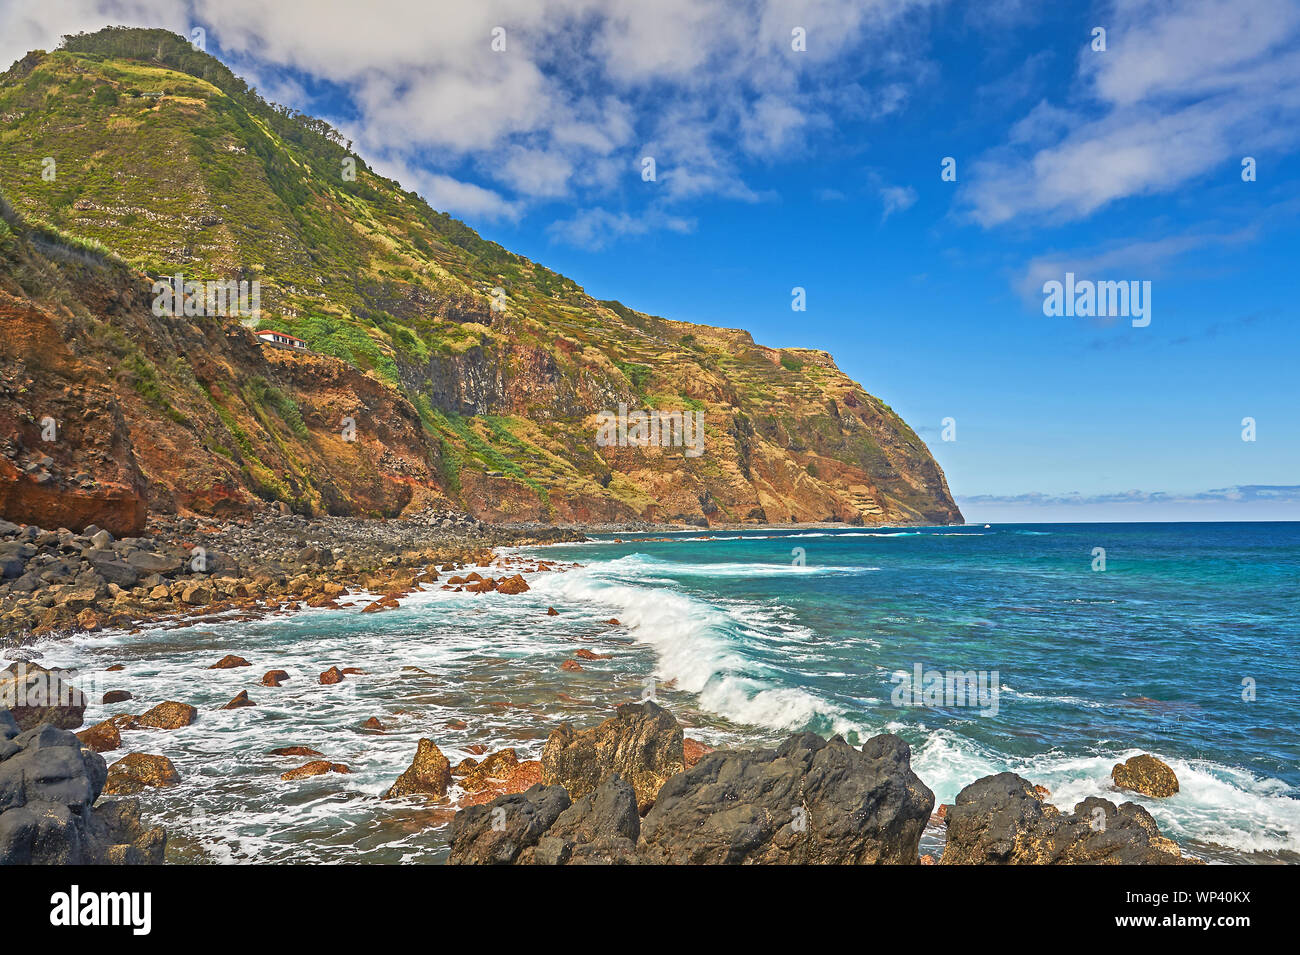 Atlantic Ocean and rugged volcanic coastline of northern Madeira at Porto Moniz, with waves breaking on rocks and shoreline. Stock Photo